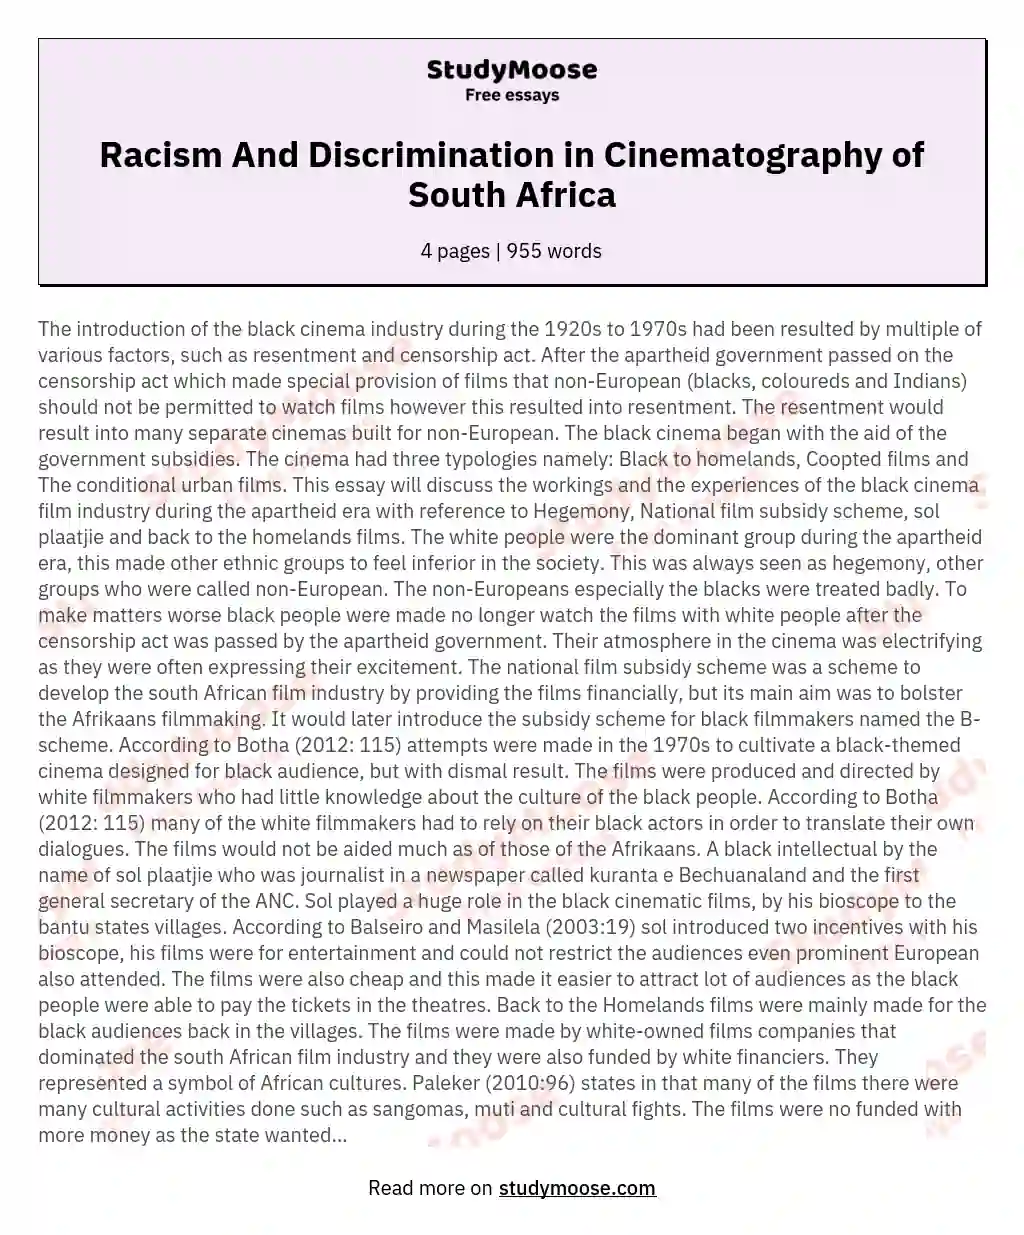 Racism And Discrimination in Cinematography of South Africa essay